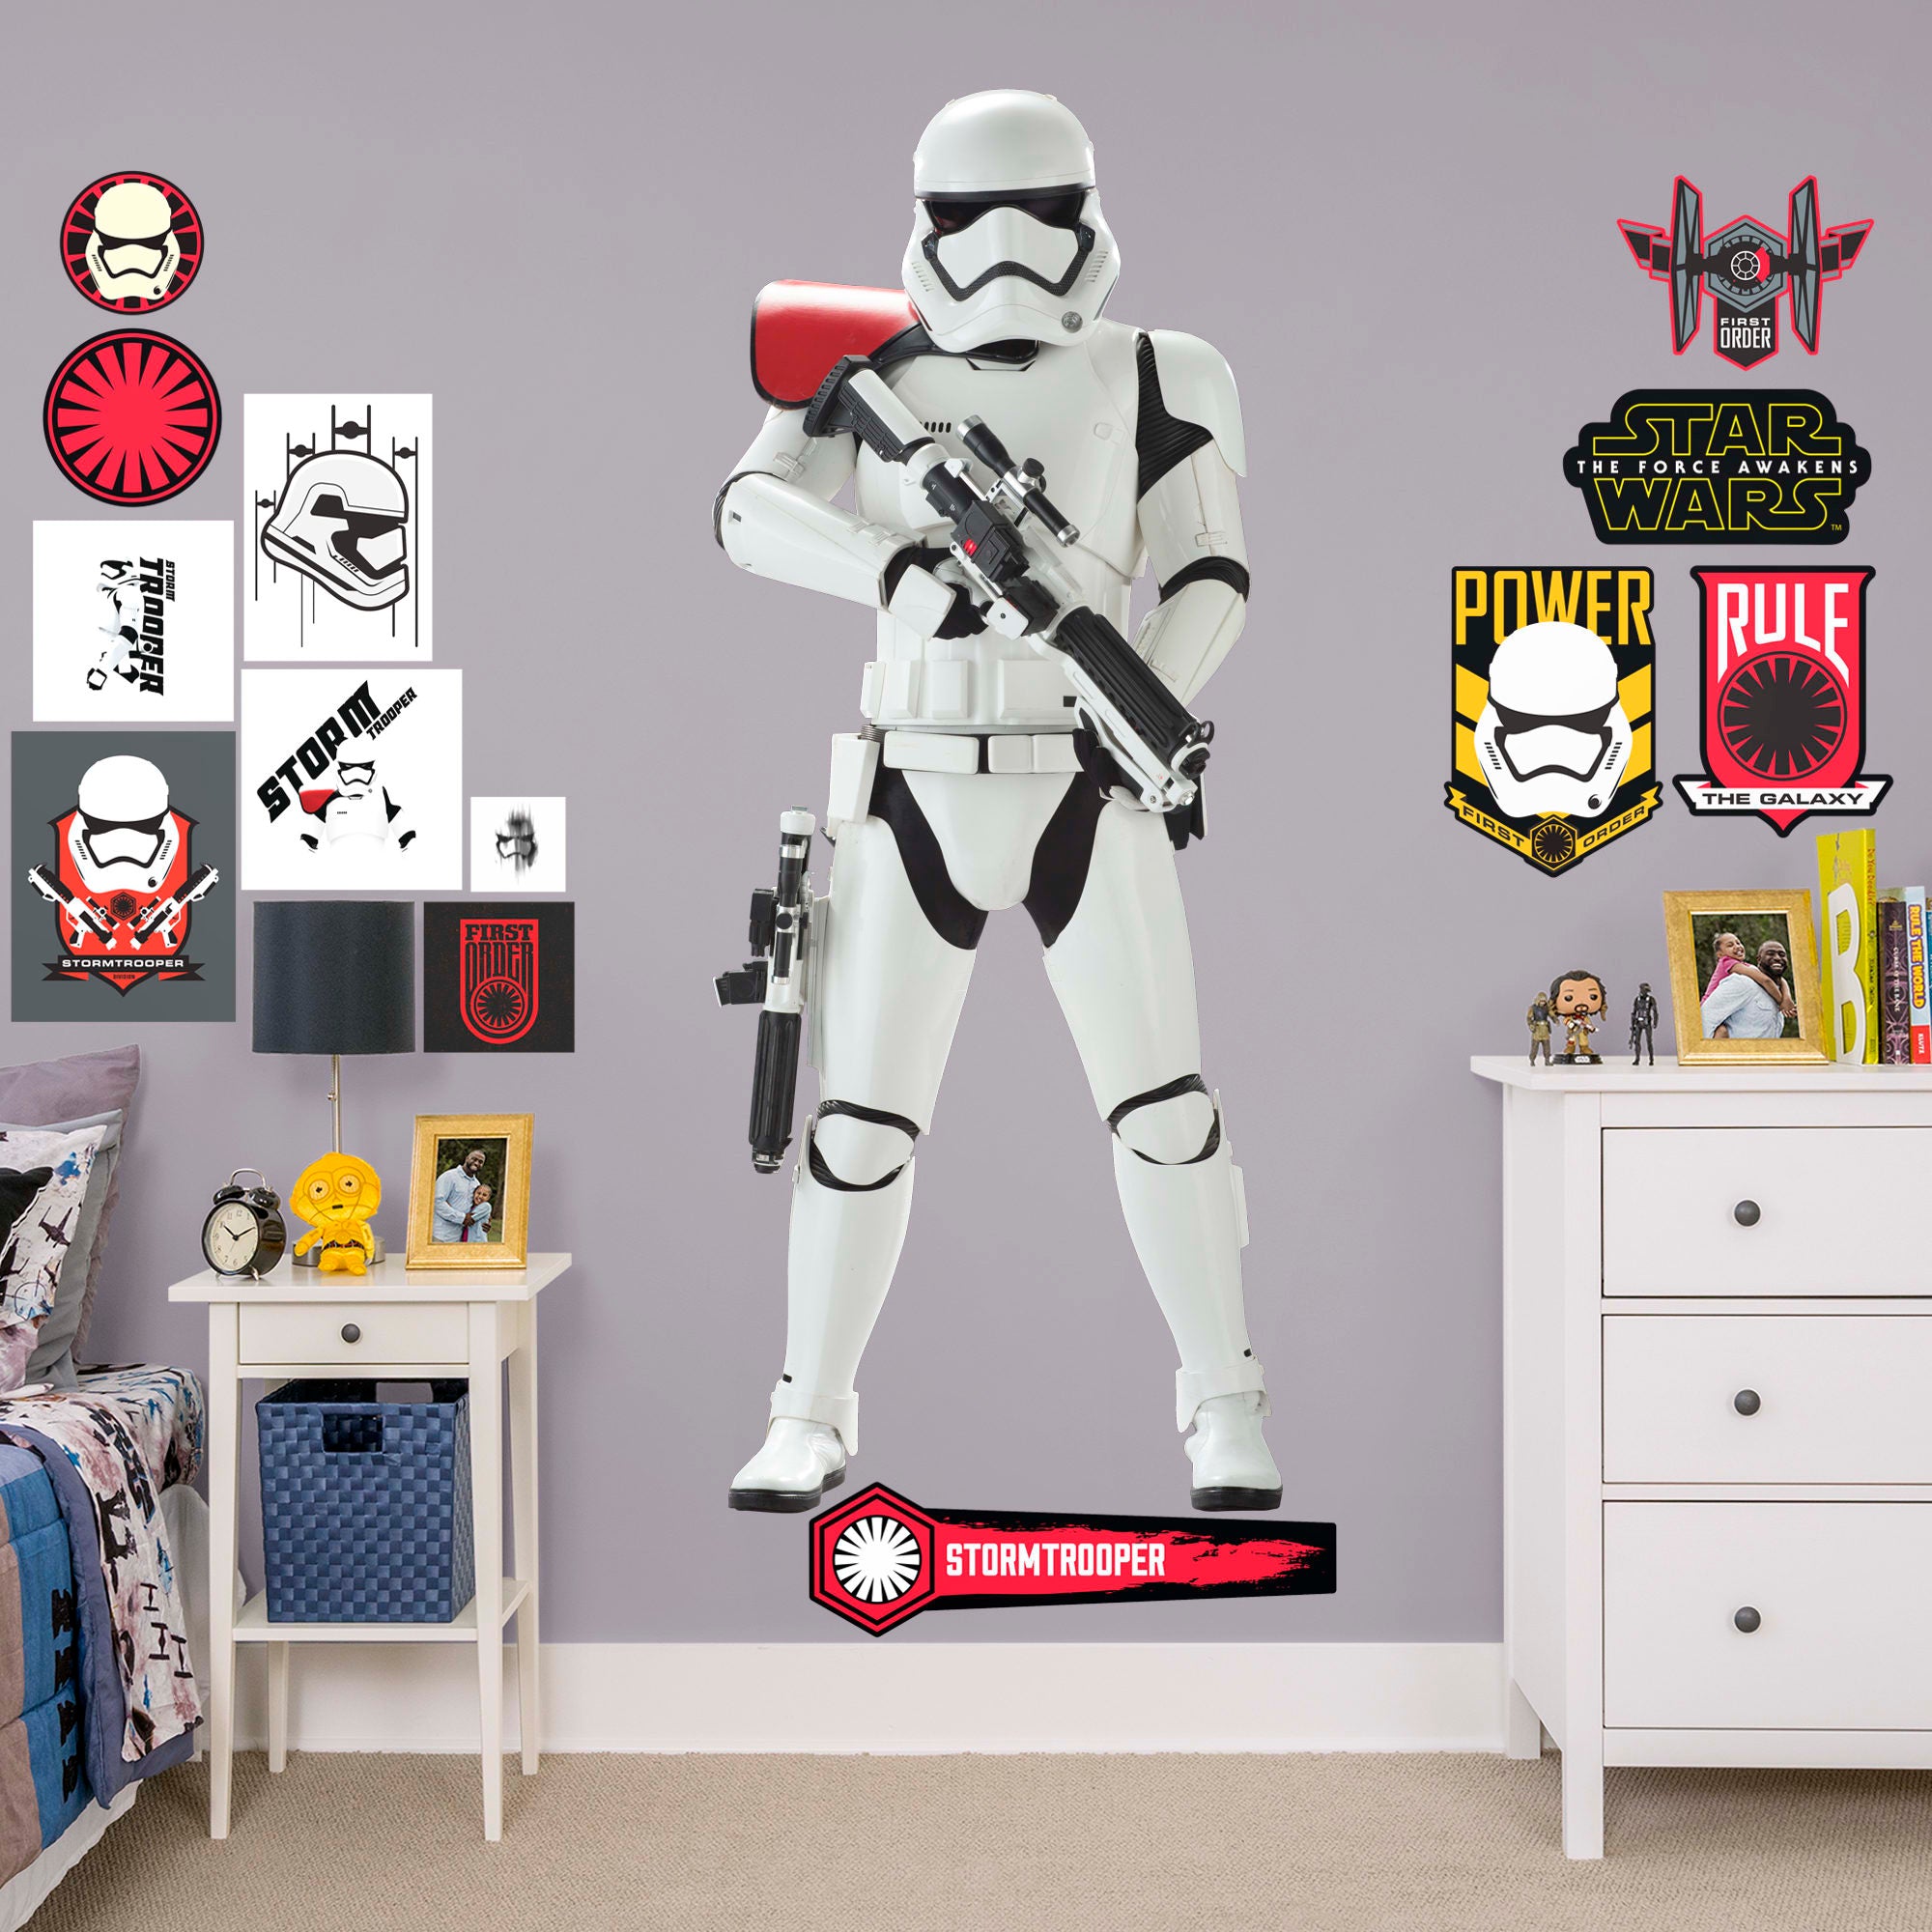 Stormtrooper - Star Wars: The Force Awakens - Officially Licensed Removable Wall Decal Life-Size Character + 13 Decals (31"W x 7